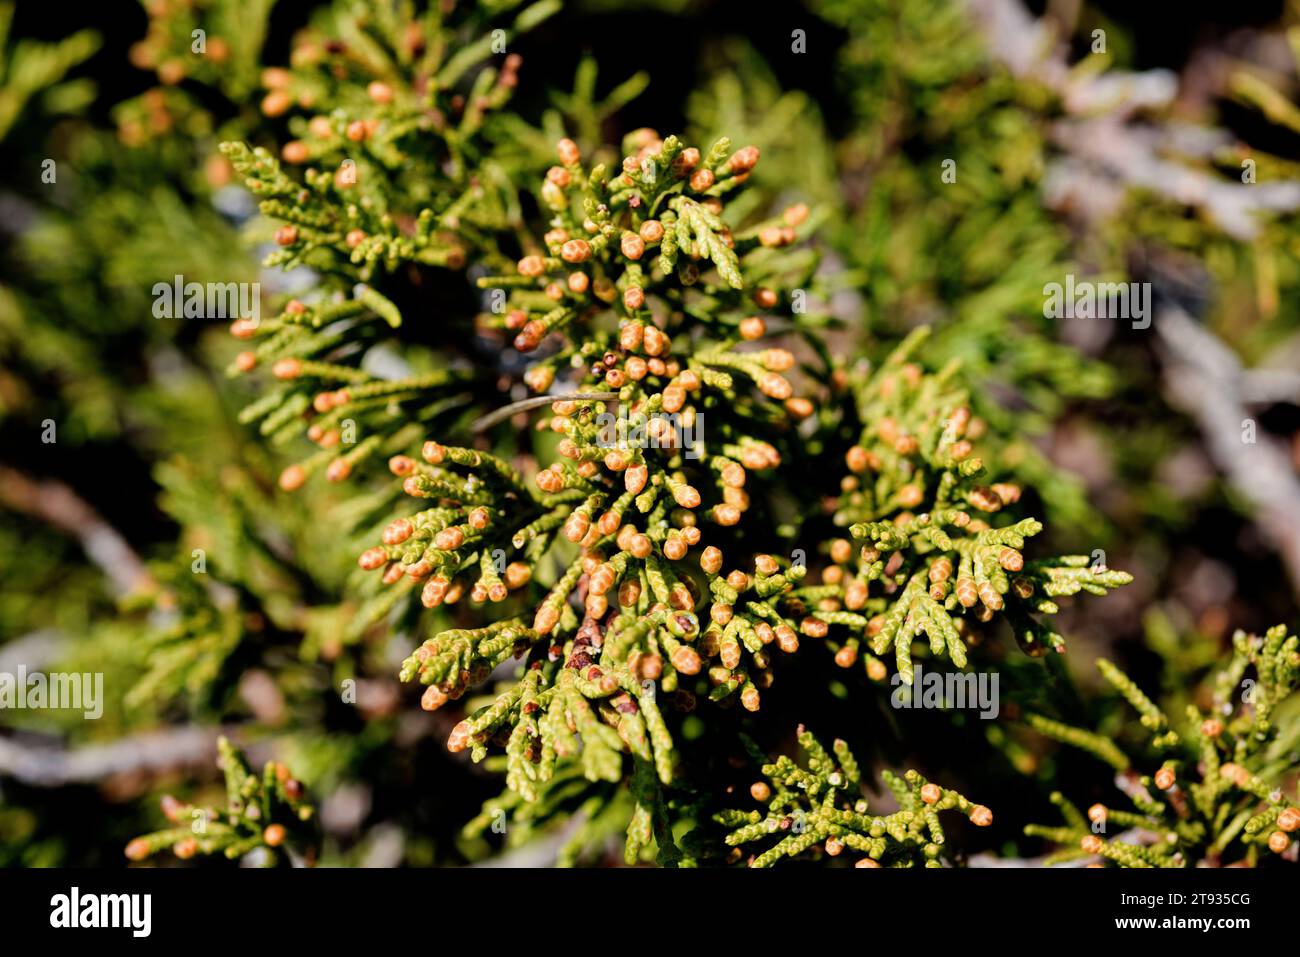 Savin juniper (Juniperus sabina) is a poisonous prostrate shrub native to south Europe mountains. Male flowers and scale-leaves detail. This photo was Stock Photo